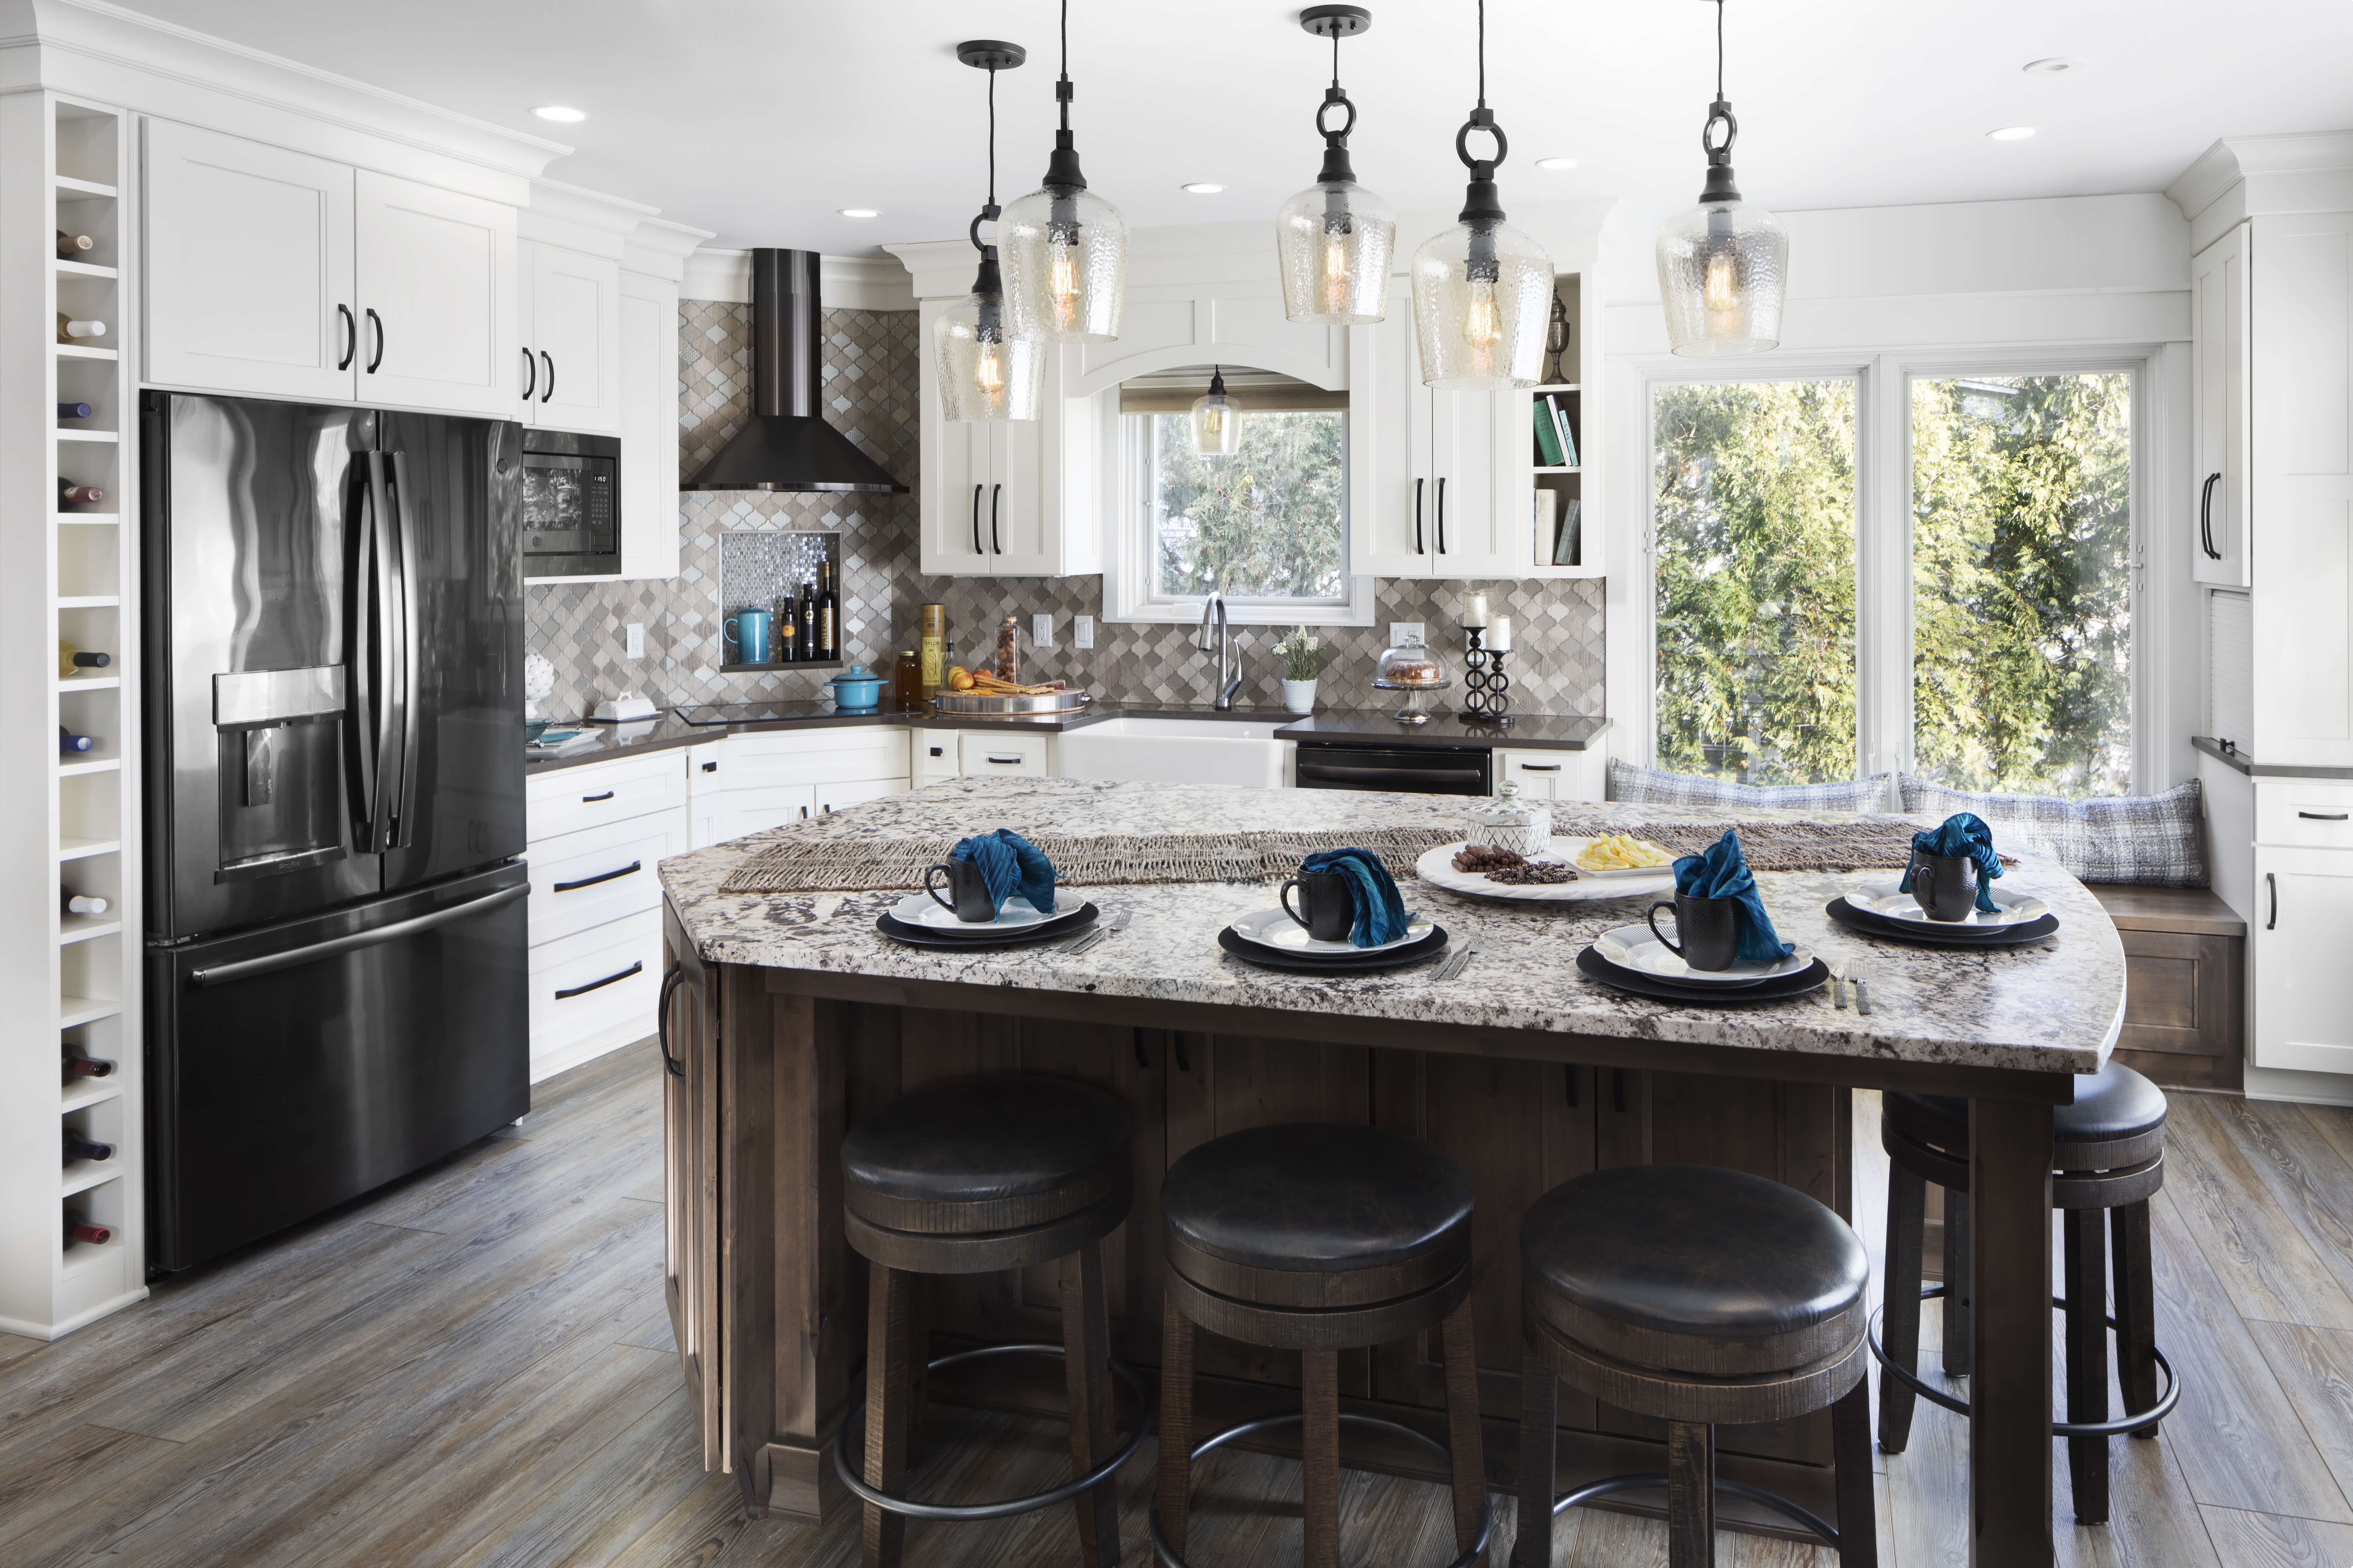 A beautiful lake house kitchen with a modern and casual style. The kitchen has white painted cabinets and a gray stained kitchen island with Knotty Alder wood, a boot bench window seat and lots of personalization.